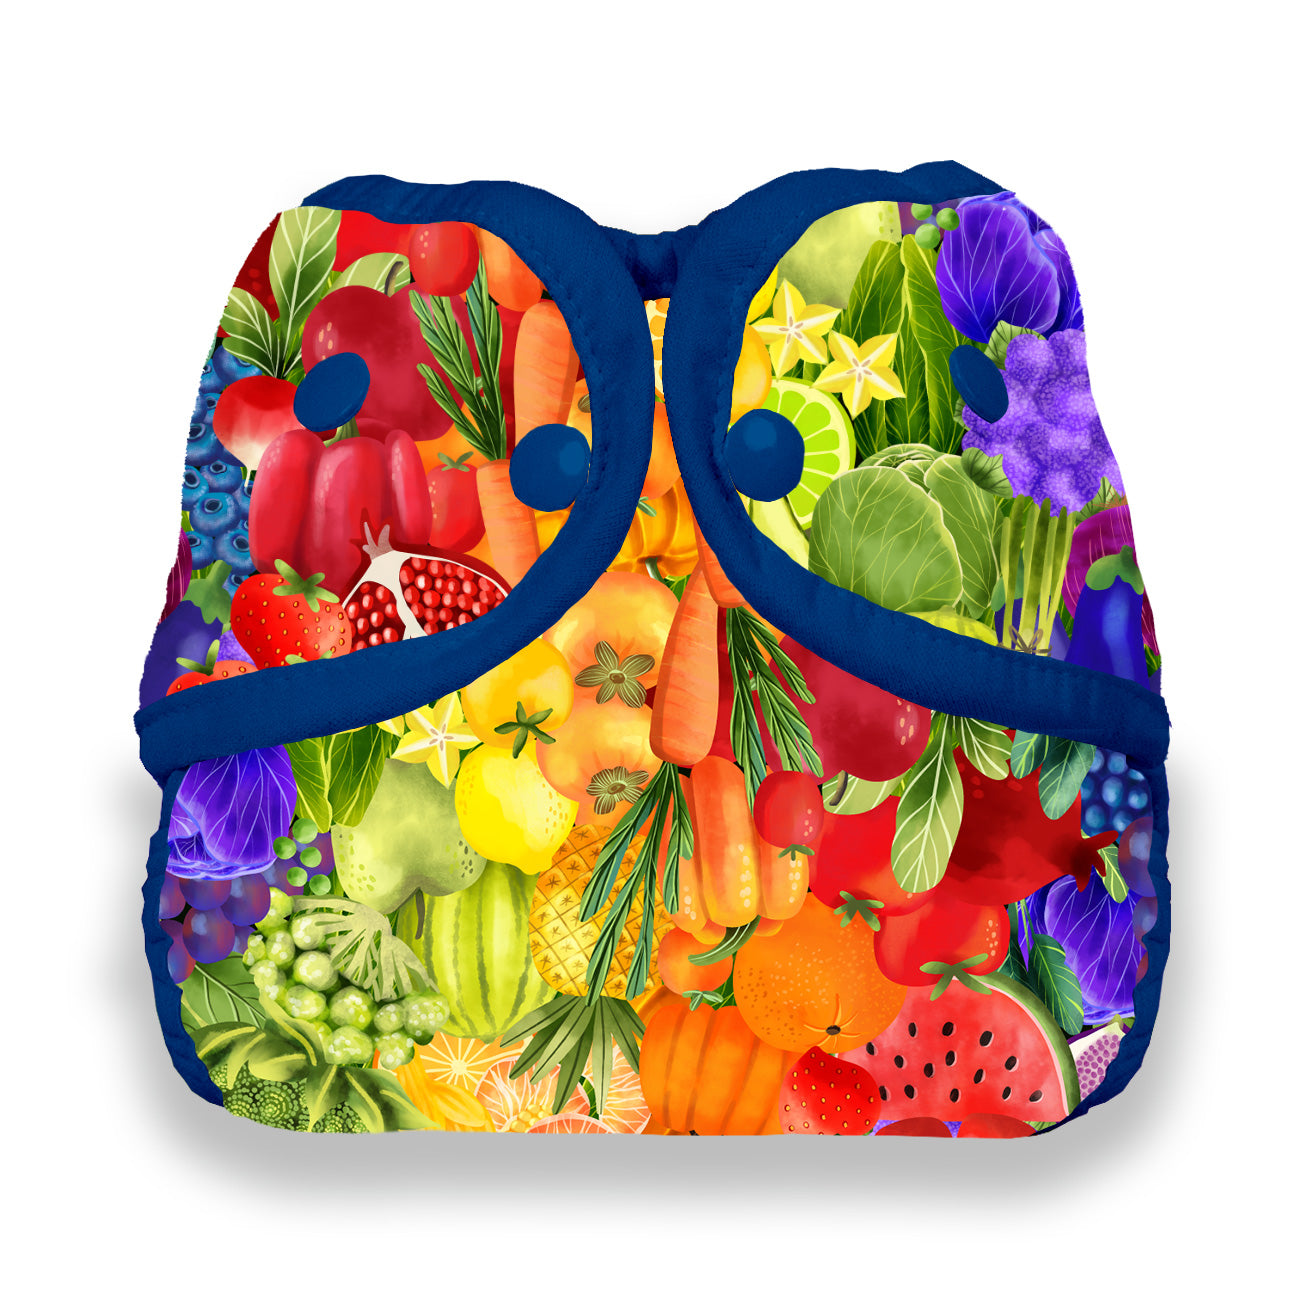 Image of Thirsties Diaper Cover with snaps in Rainbow Harvest